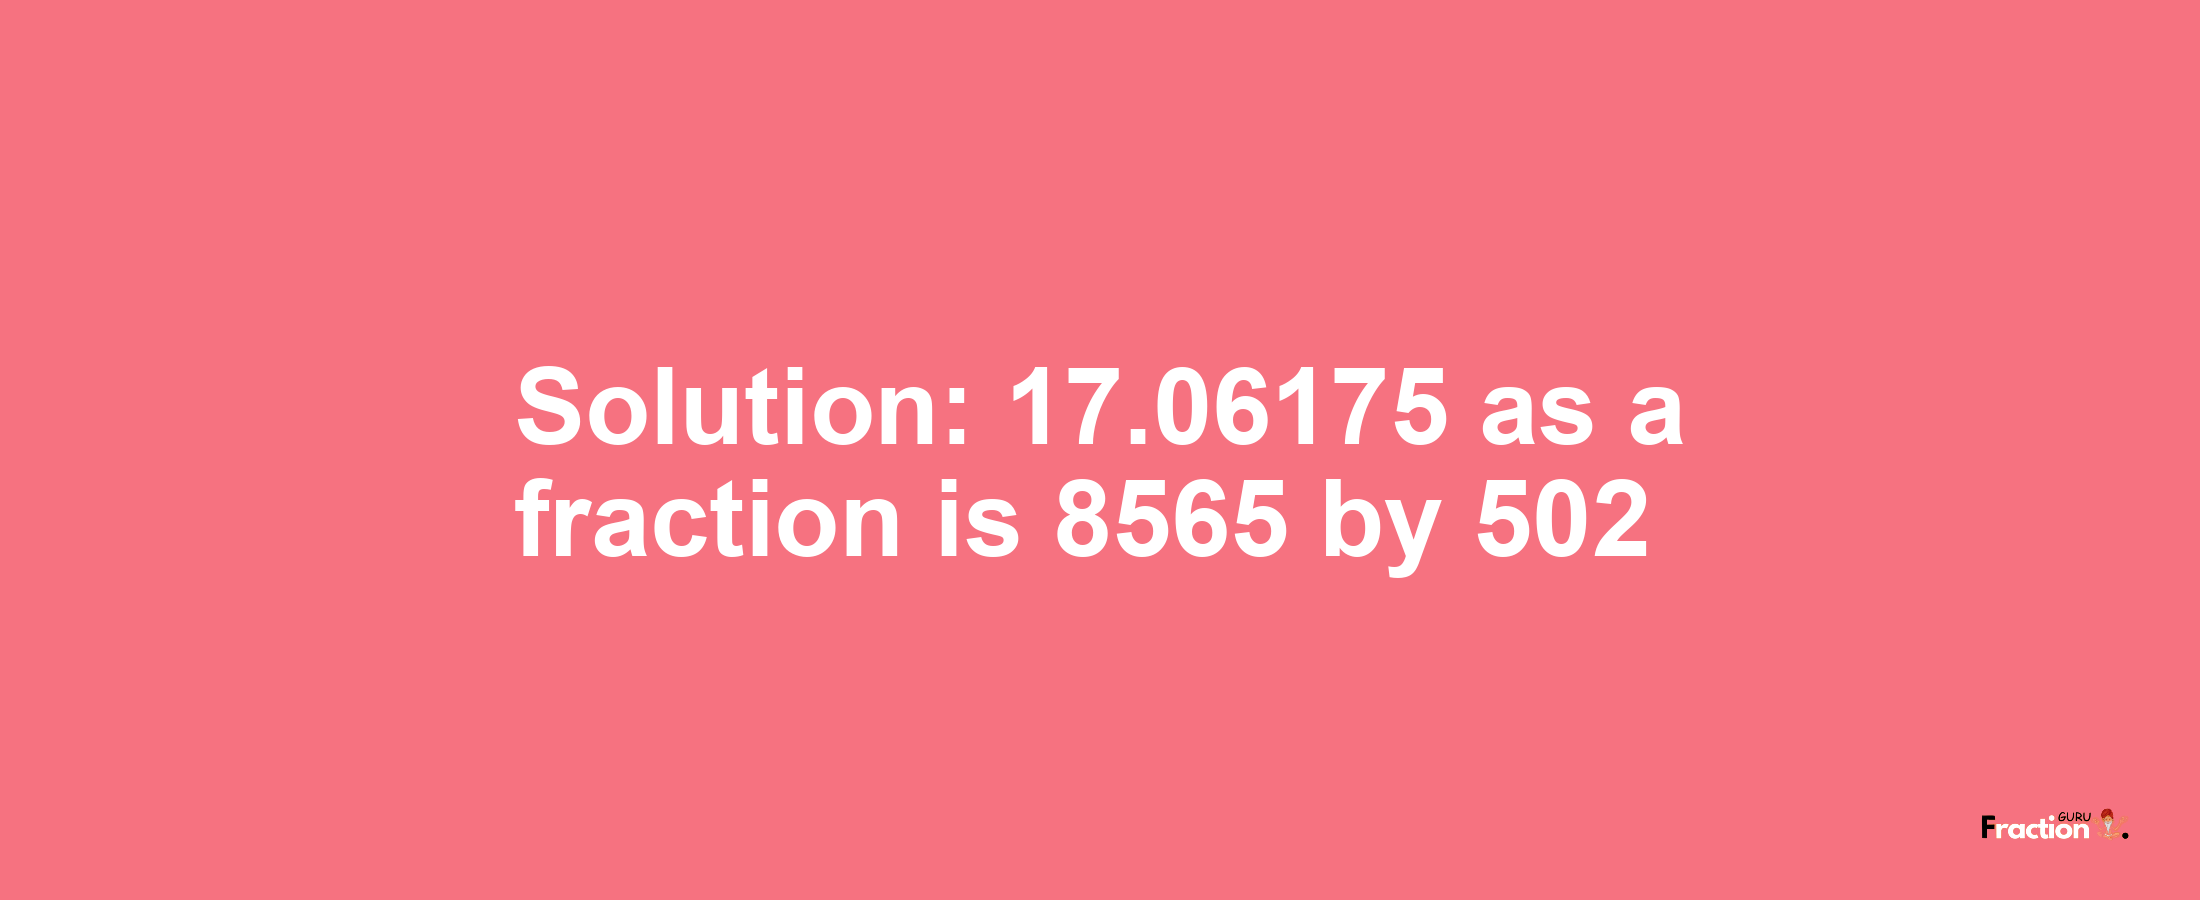 Solution:17.06175 as a fraction is 8565/502